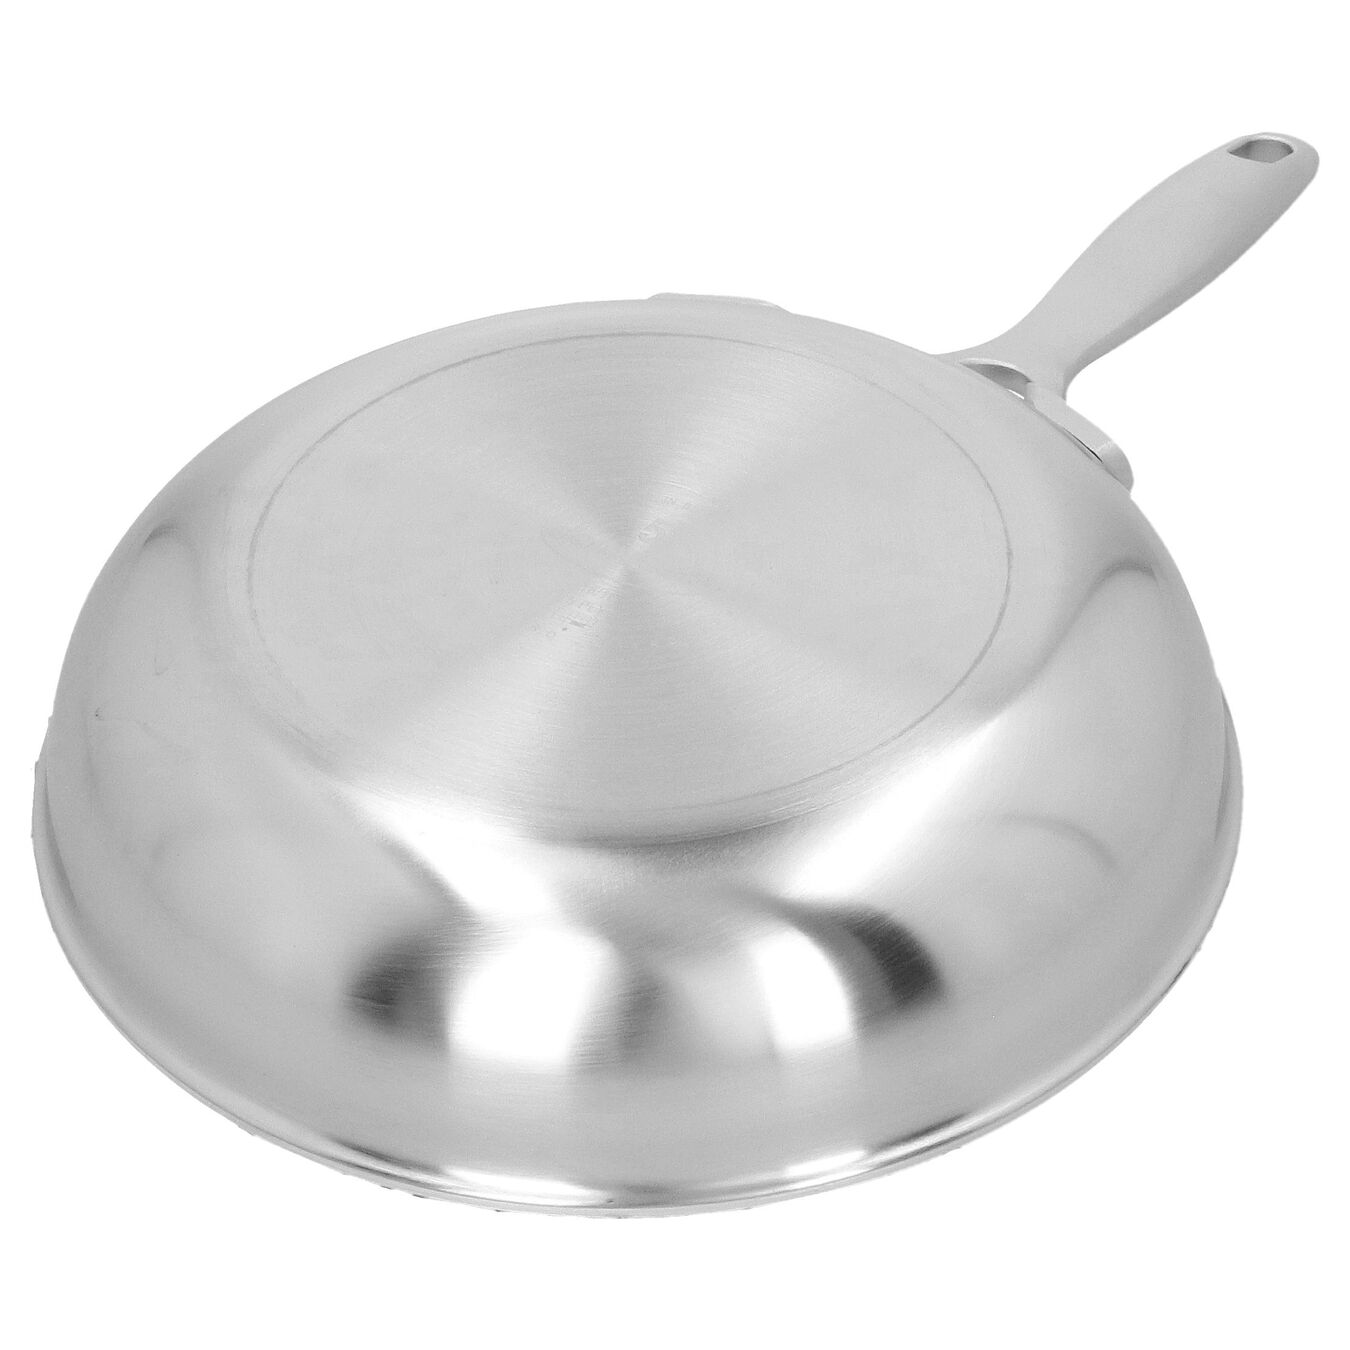 8-inch, 18/10 Stainless Steel, PTFE, Traditional Nonstick Fry Pan,,large 5